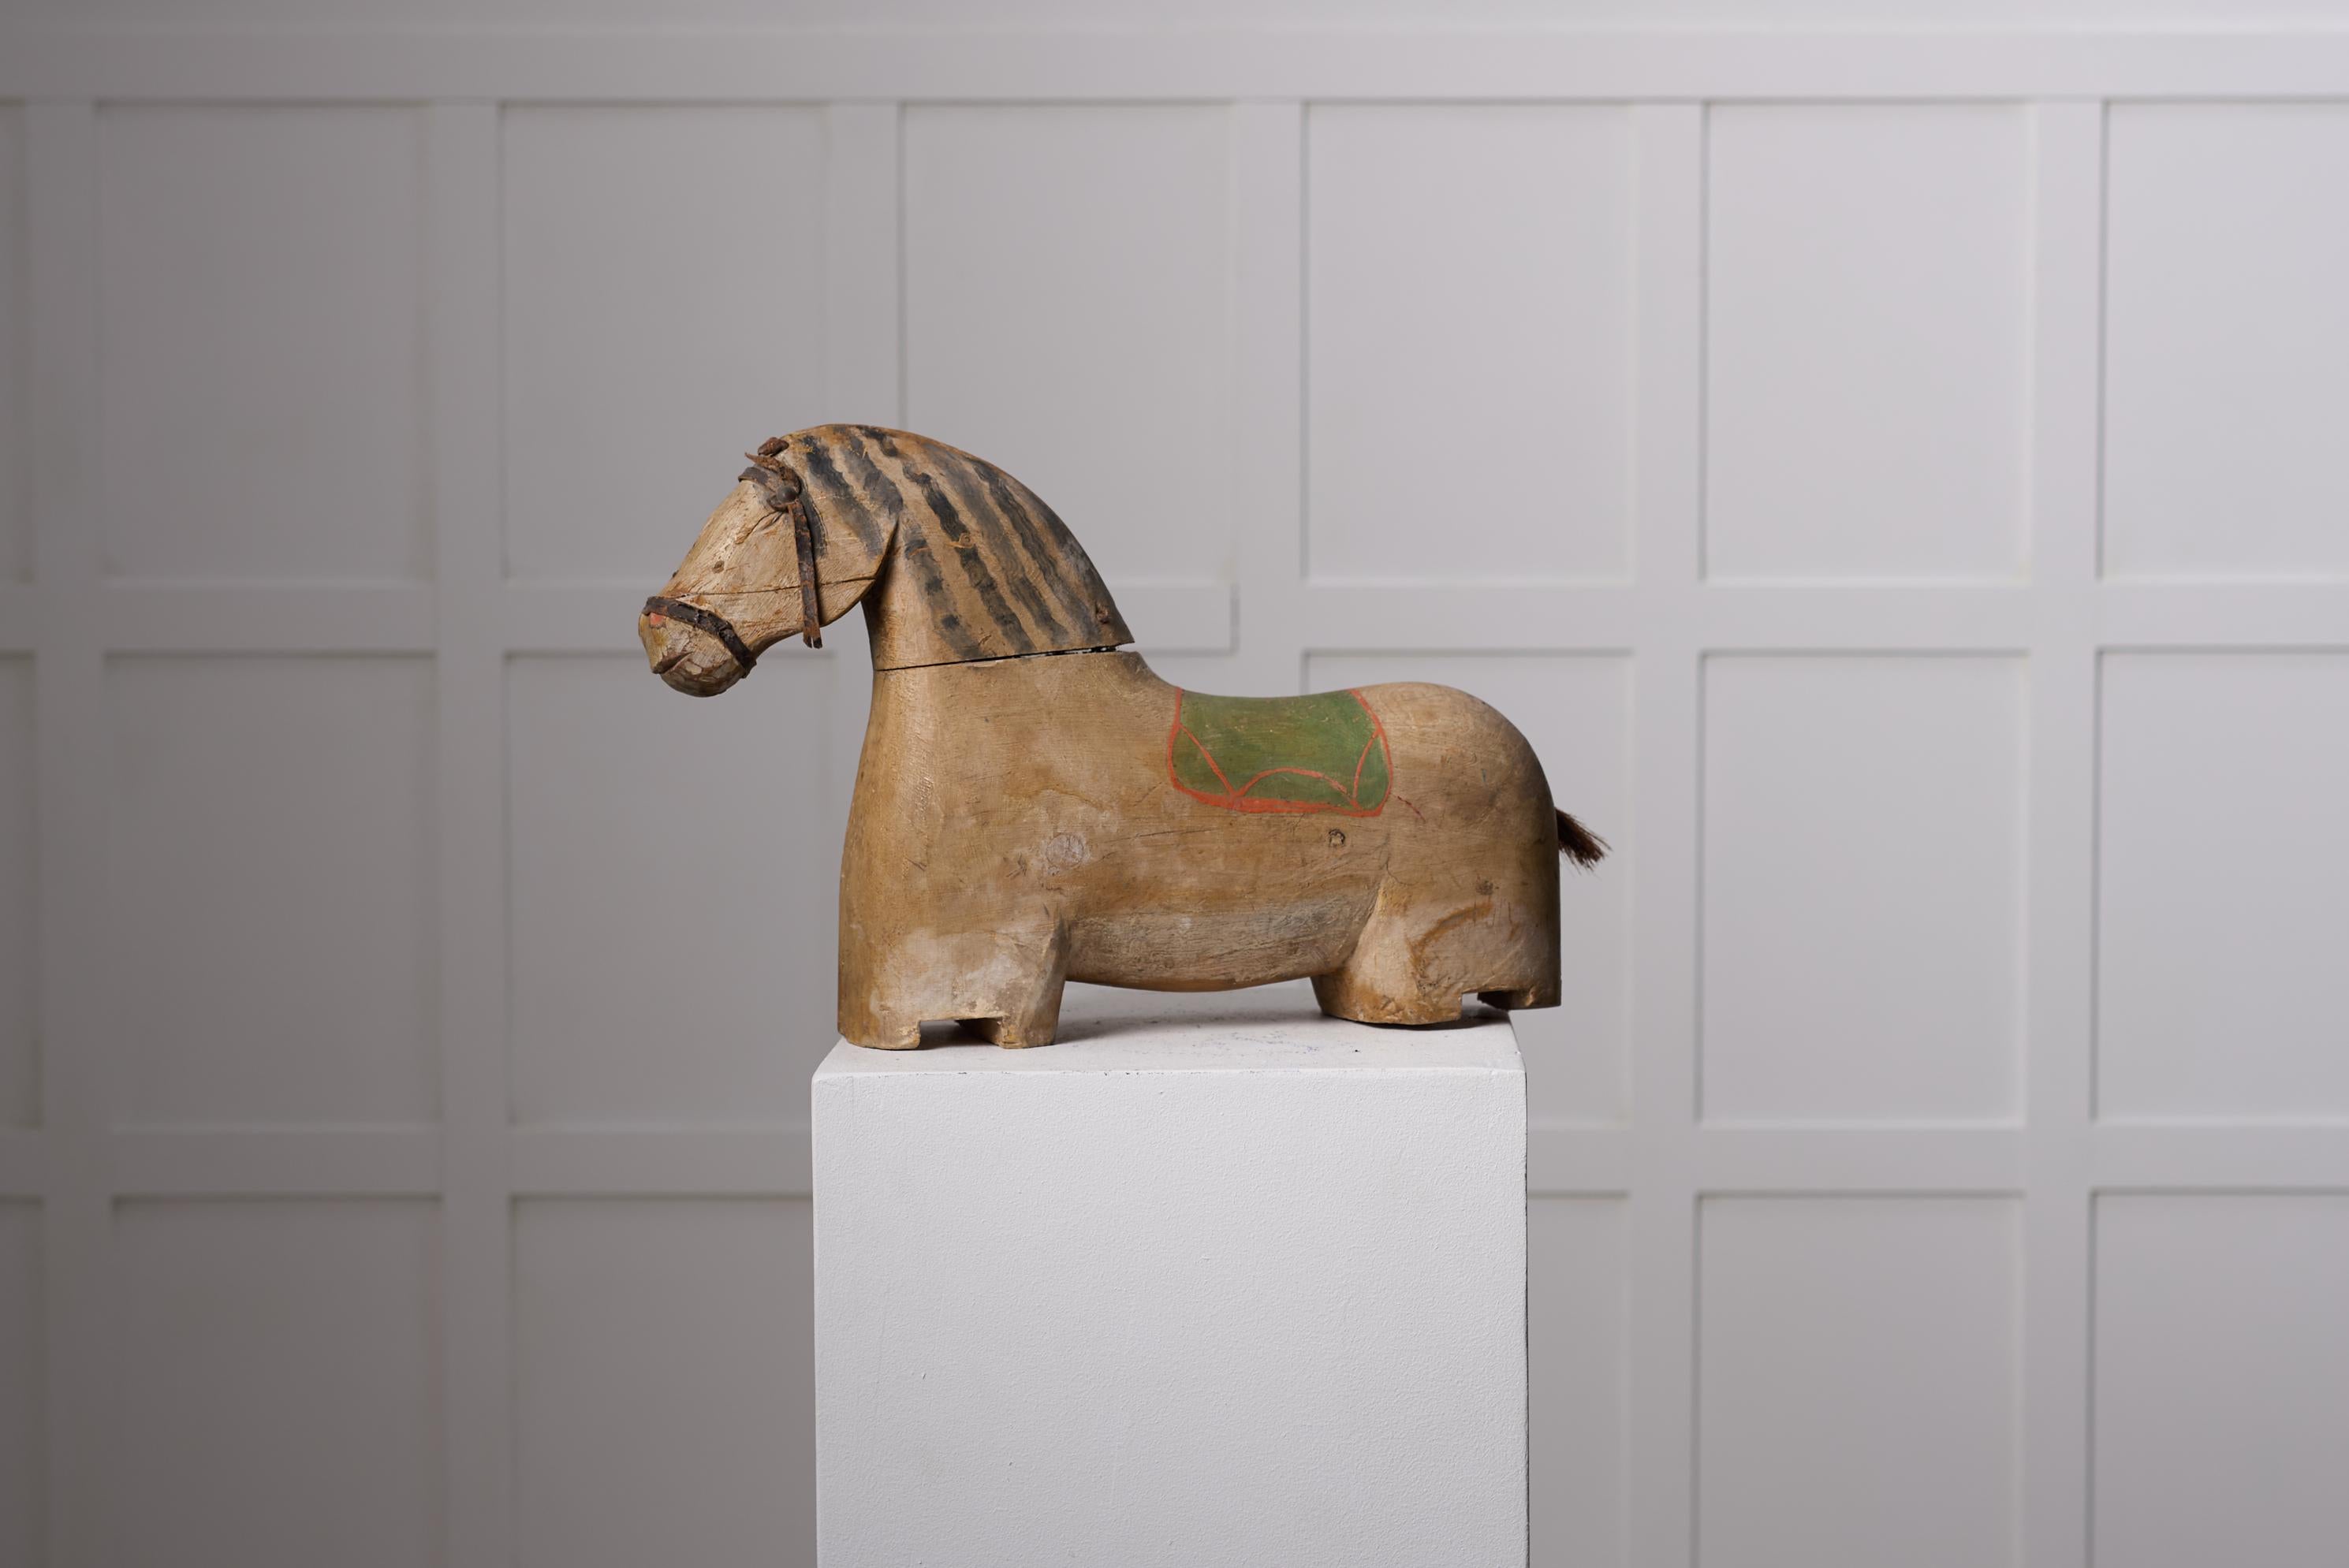 Antique wooden horse sculpture from northern Sweden. The horse is from around 1850 and has a body in pine with original paint. The sculpture is made by hand and a one of a kind piece. Most likely it has been standing on a platform with wheels. The